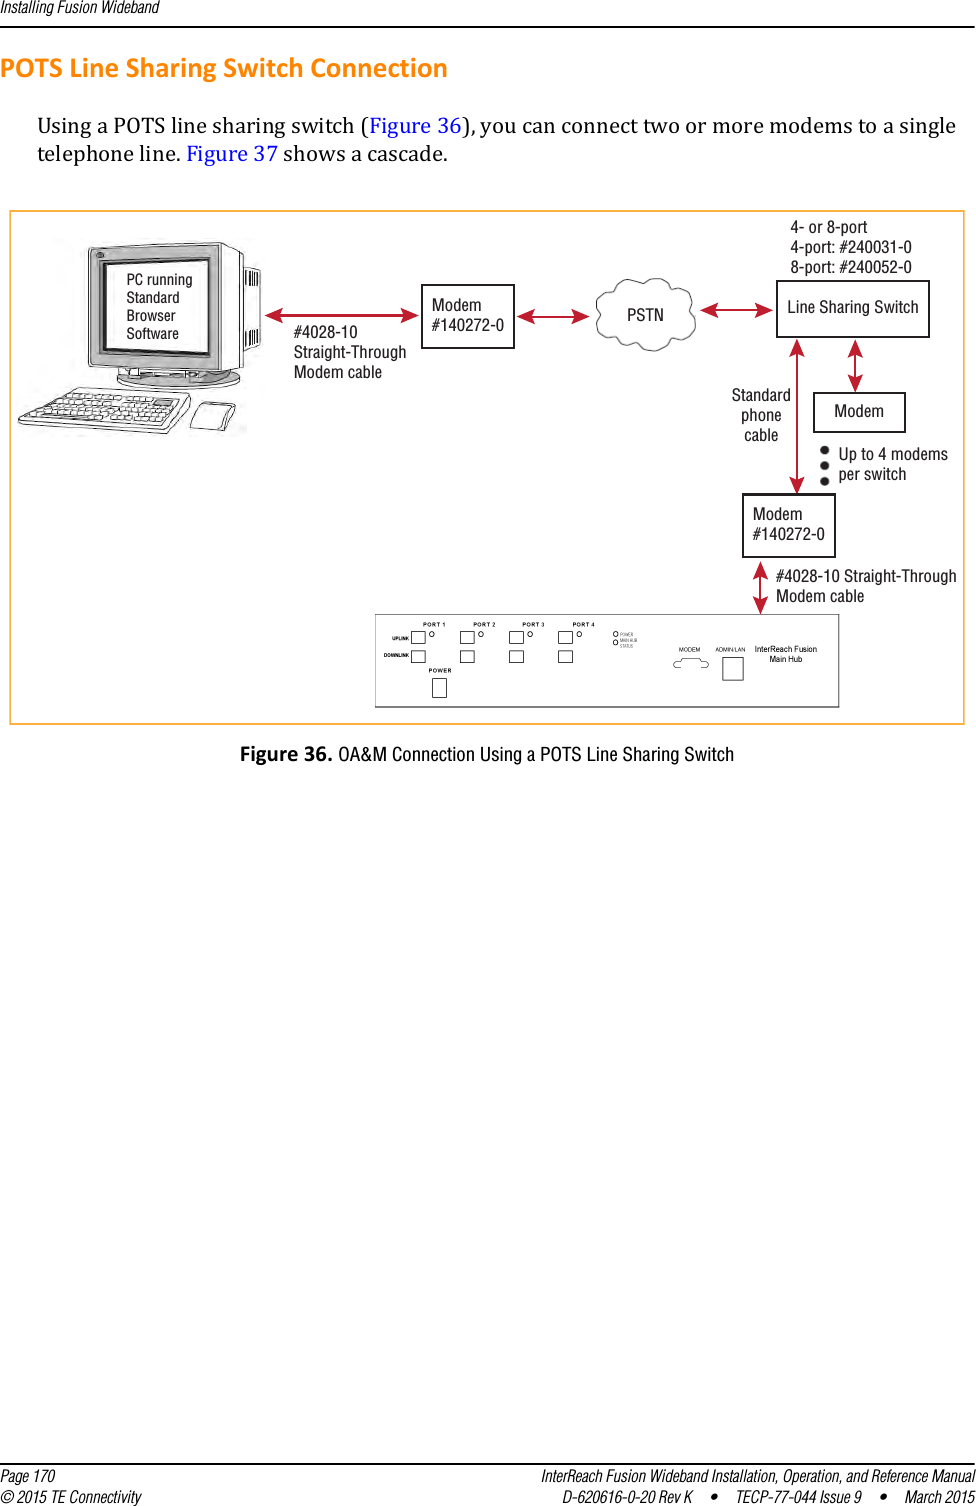 Installing Fusion Wideband  Page 170 InterReach Fusion Wideband Installation, Operation, and Reference Manual© 2015 TE Connectivity D-620616-0-20 Rev K  •  TECP-77-044 Issue 9  •  March 2015POTS Line Sharing Switch ConnectionUsing a POTS line sharing switch (Figure 36), you can connect two or more modems to a single telephone line. Figure 37 shows a cascade. Figure 36. OA&amp;M Connection Using a POTS Line Sharing SwitchModem#4028-10 Straight-ThroughModem cablePC runningStandardBrowserSoftwarePSTNModem#140272-0#4028-10Straight-ThroughModem cableLine Sharing Switch4- or 8-port4-port: #240031-08-port: #240052-0StandardphonecableUp to 4 modemsper switchModem#140272-0